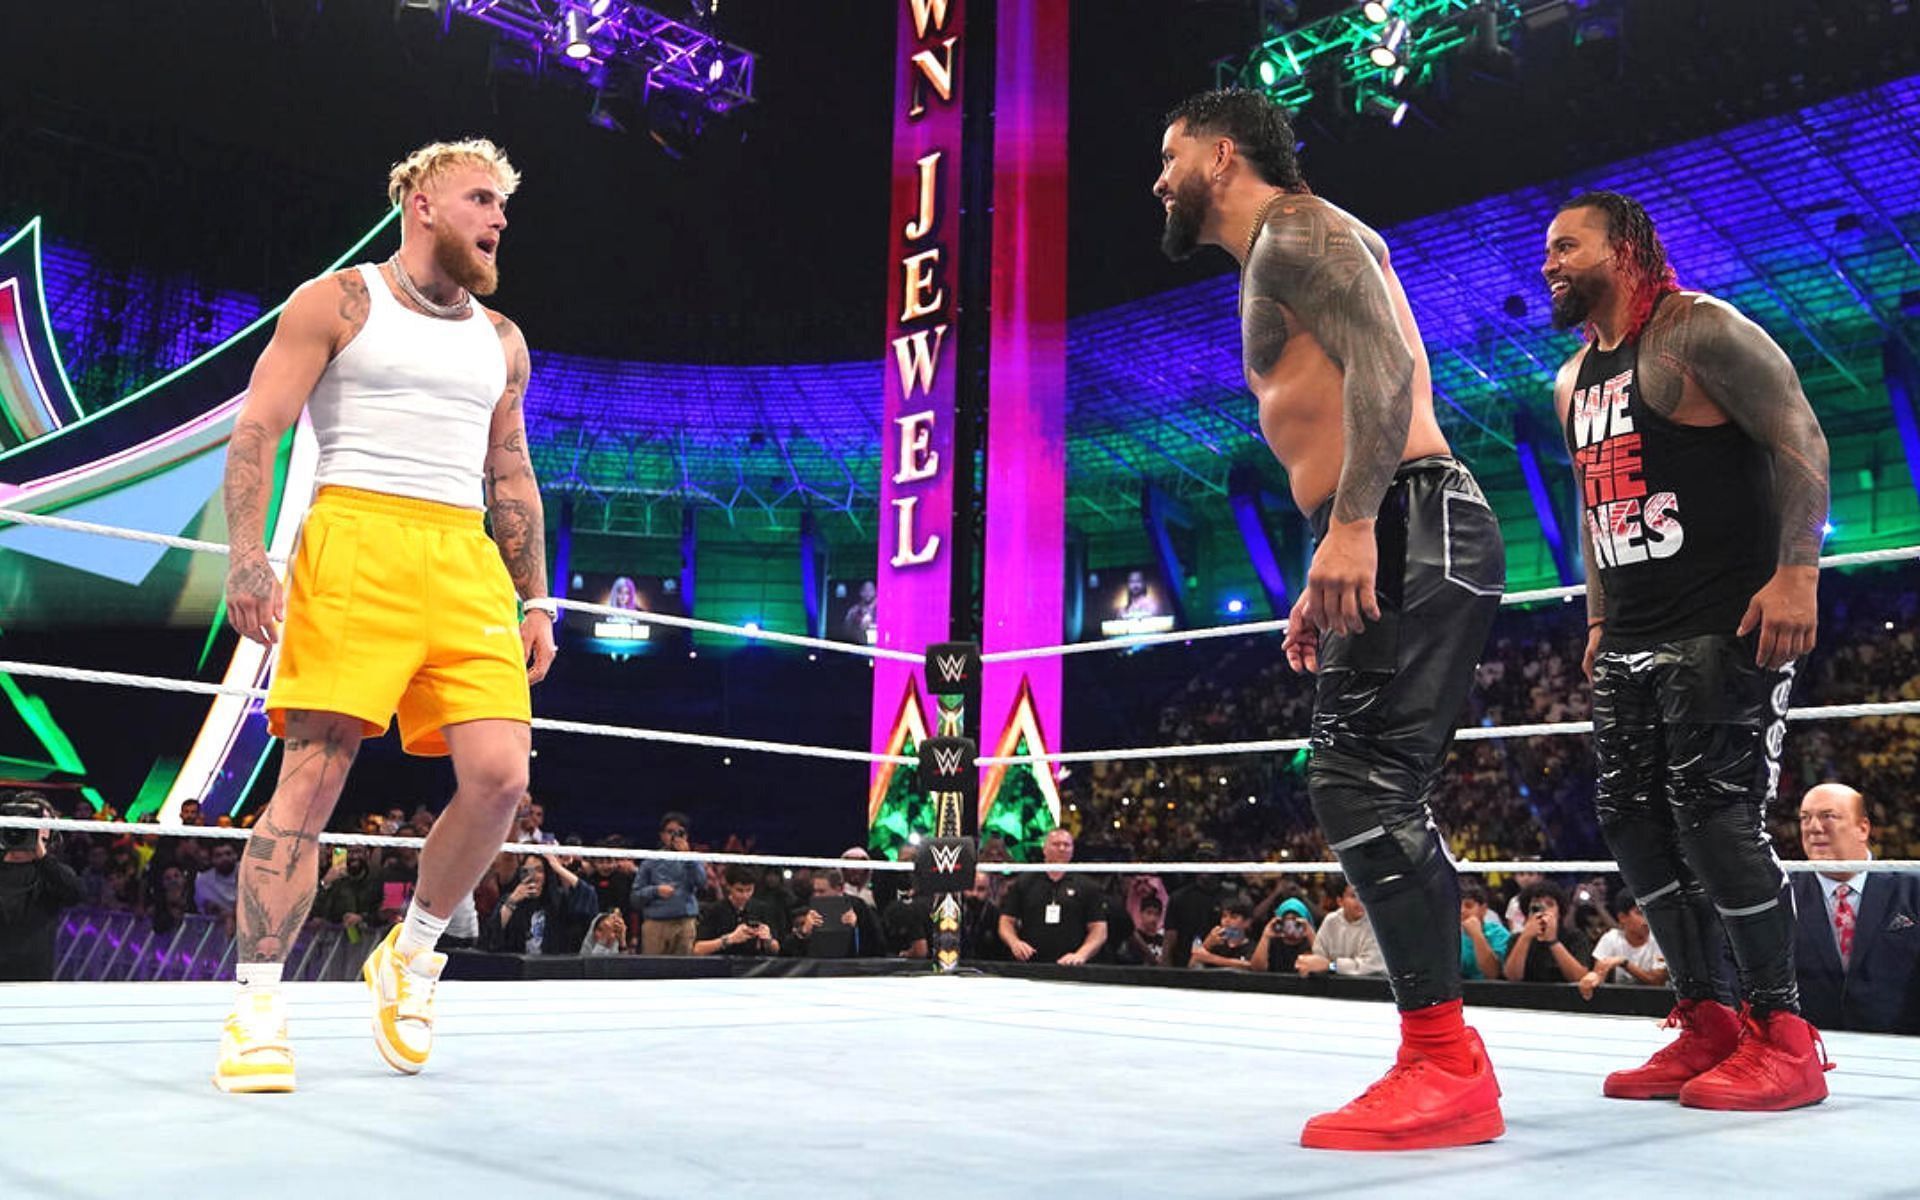 Jake Paul wants a match against The Usos